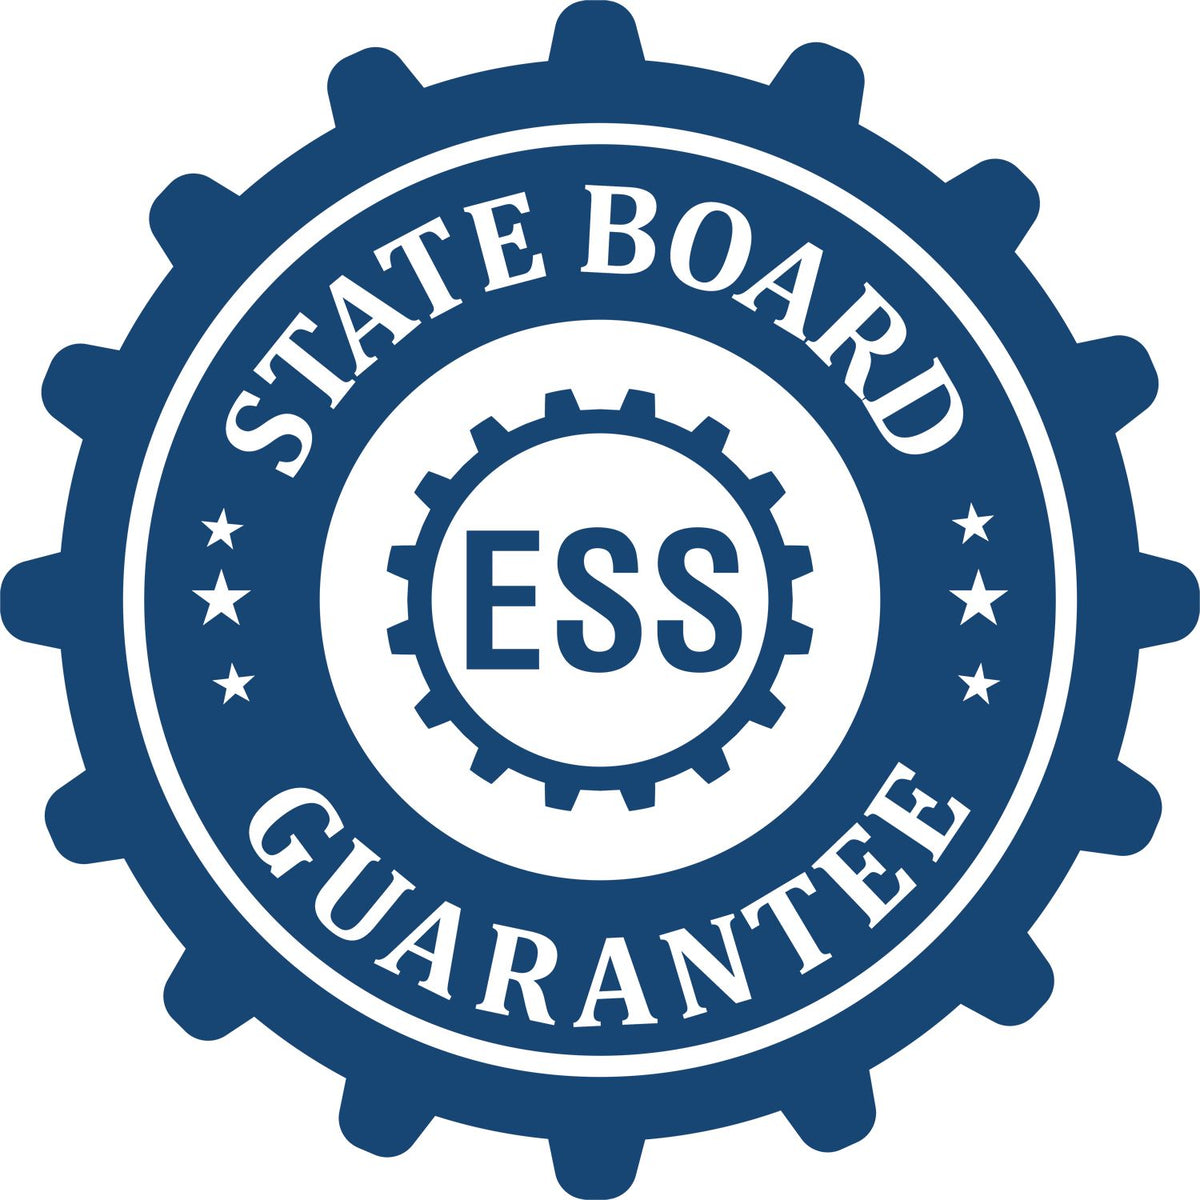 An emblem in a gear shape illustrating a state board guarantee for the Hybrid Mississippi Architect Seal